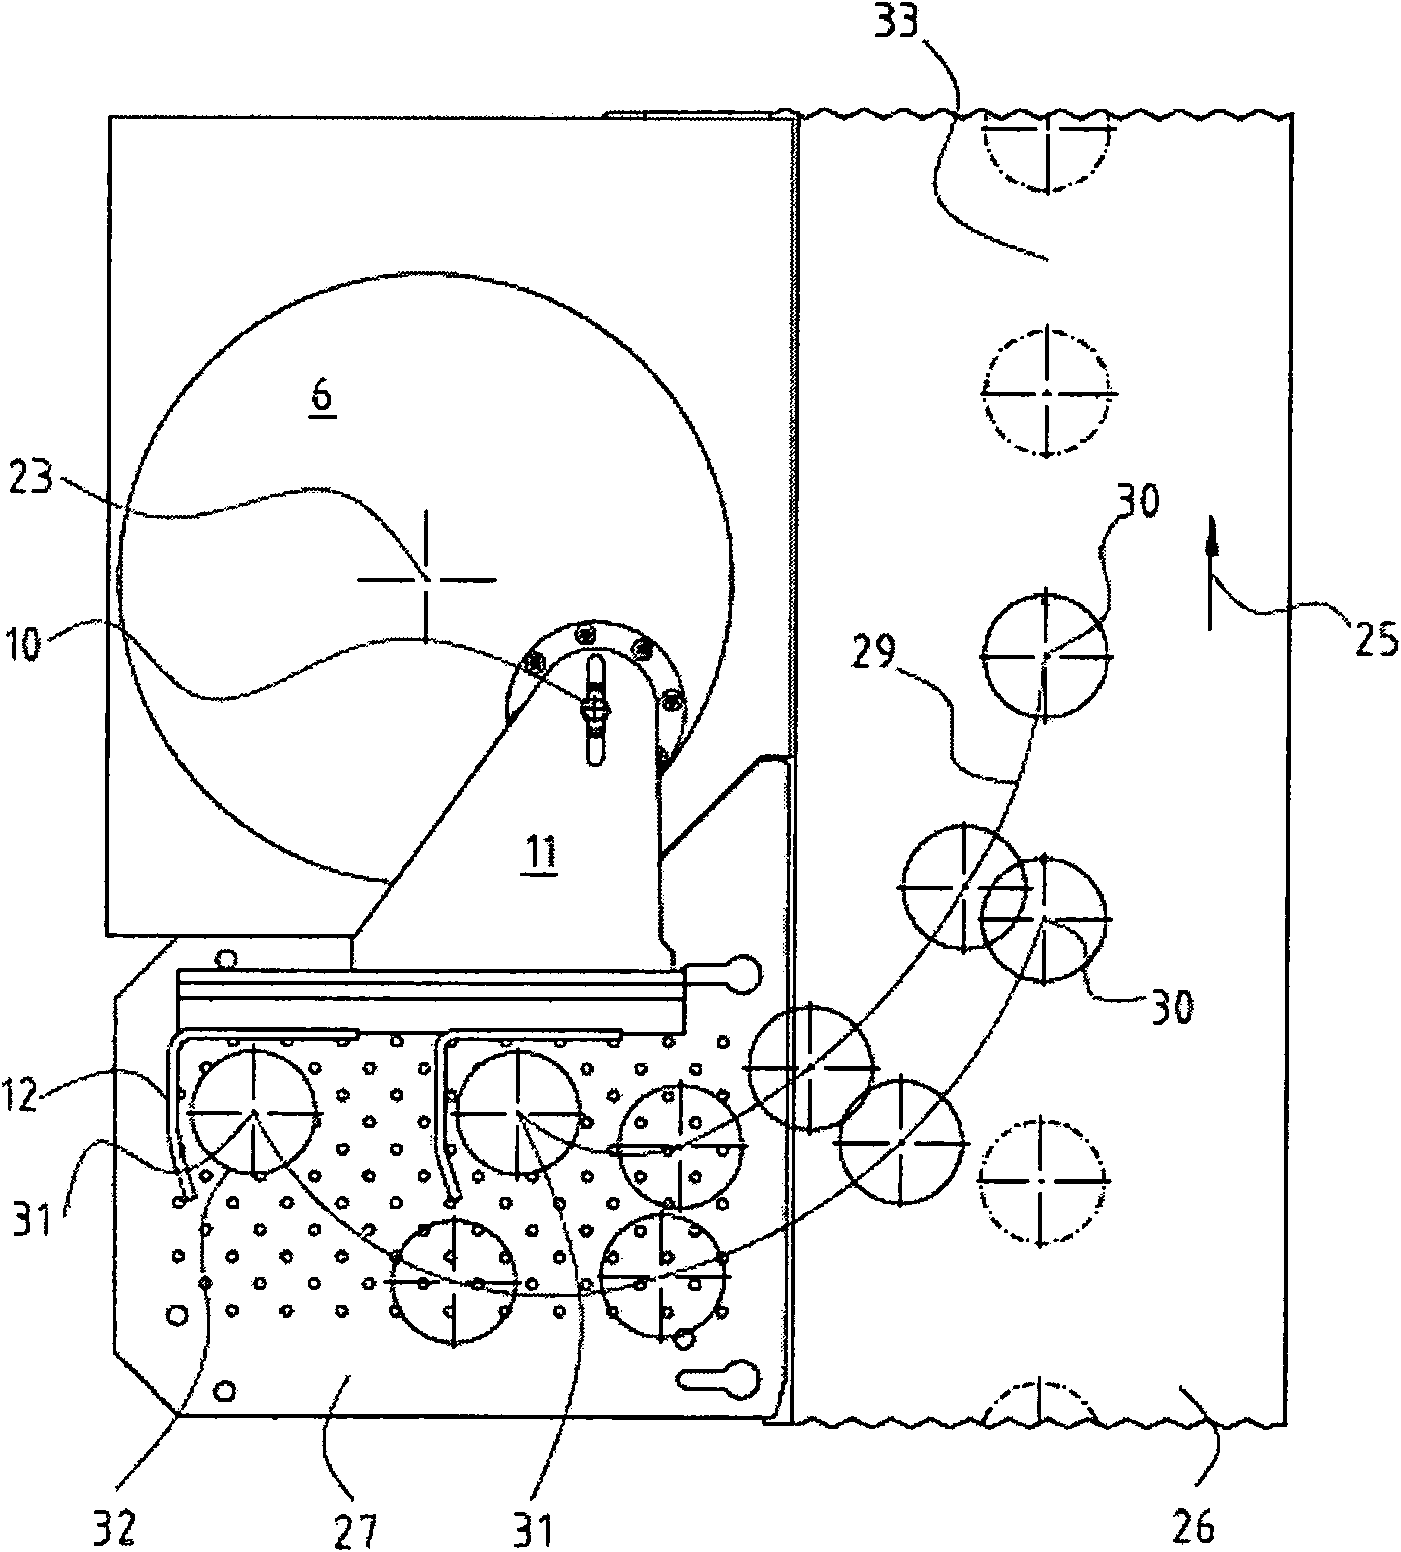 Device that moves glass items onto a conveyor belt